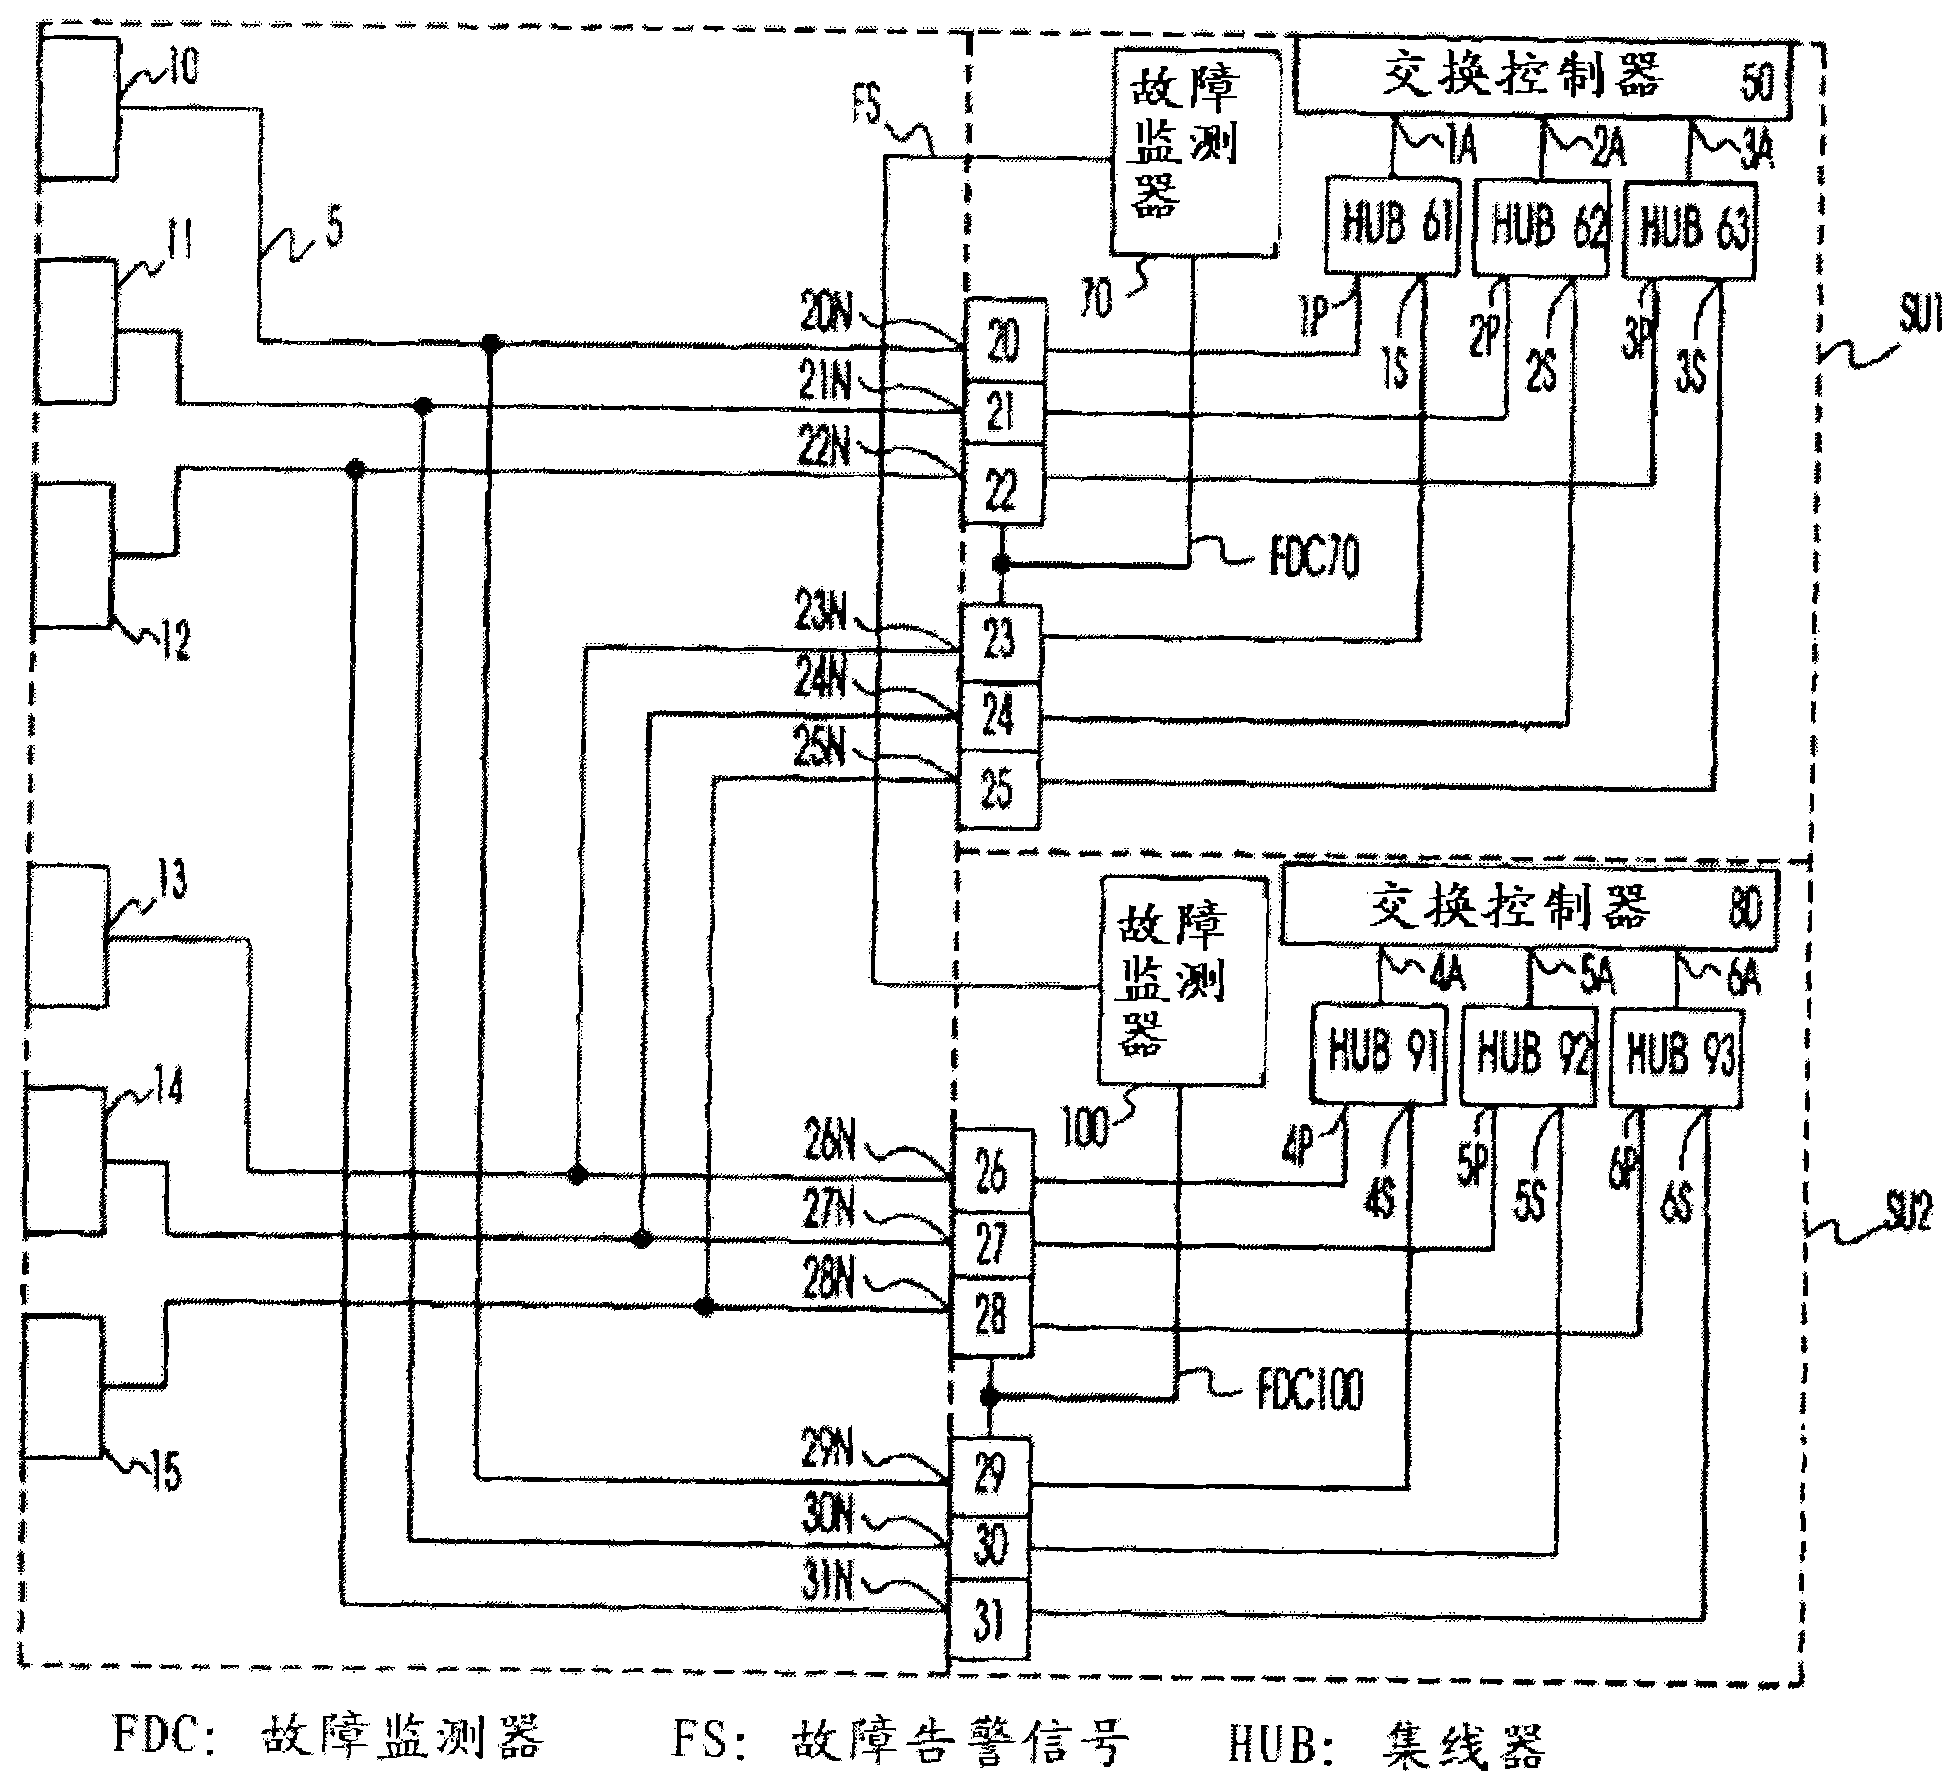 Fault-tolerant network switch